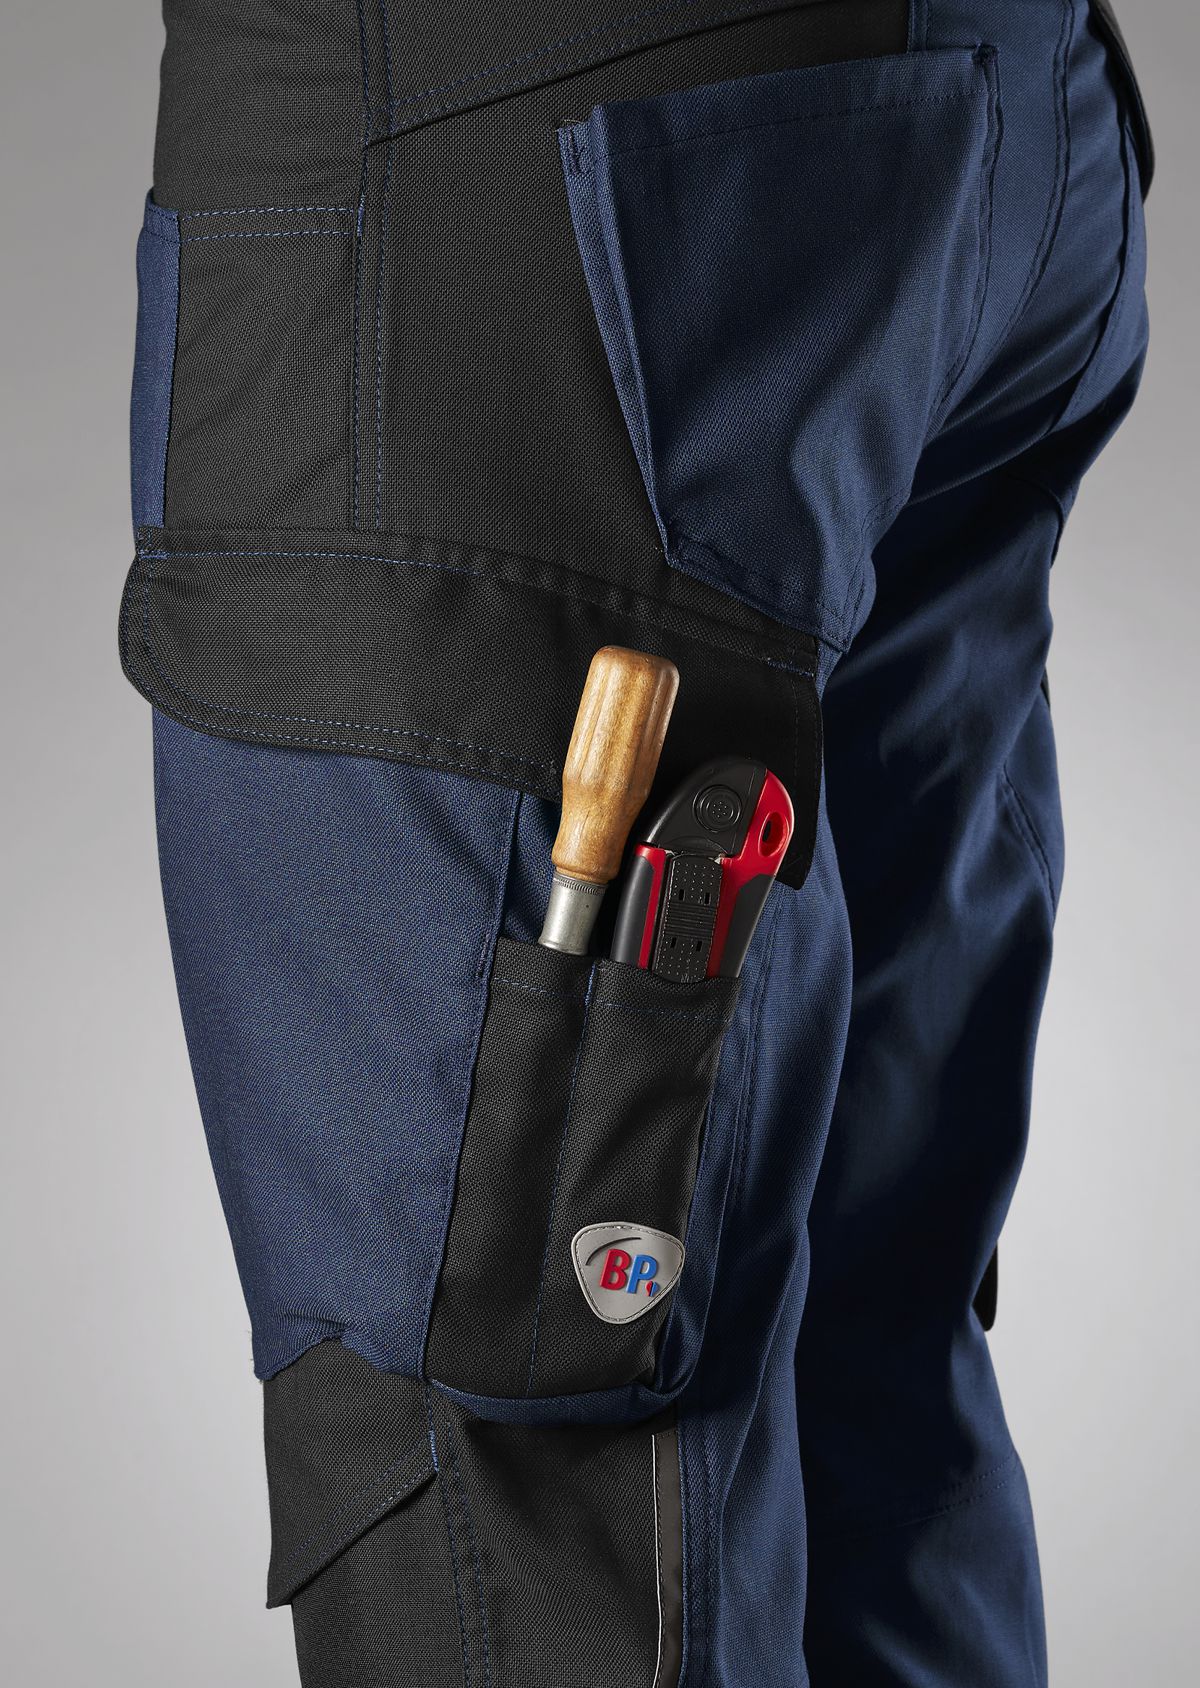 BP® Robust work trousers with knee pad pockets